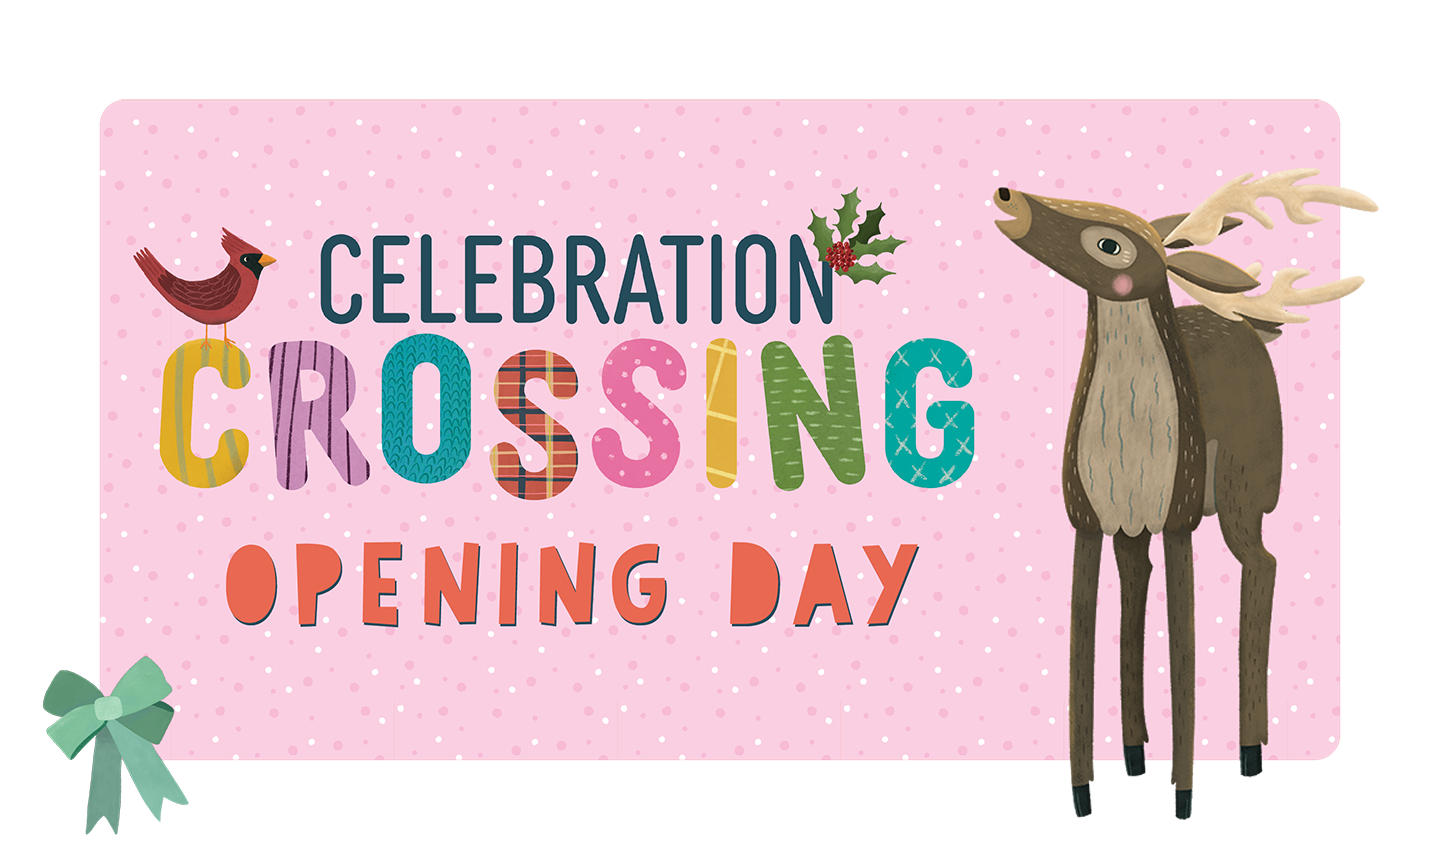 Celebration Crossing opening day